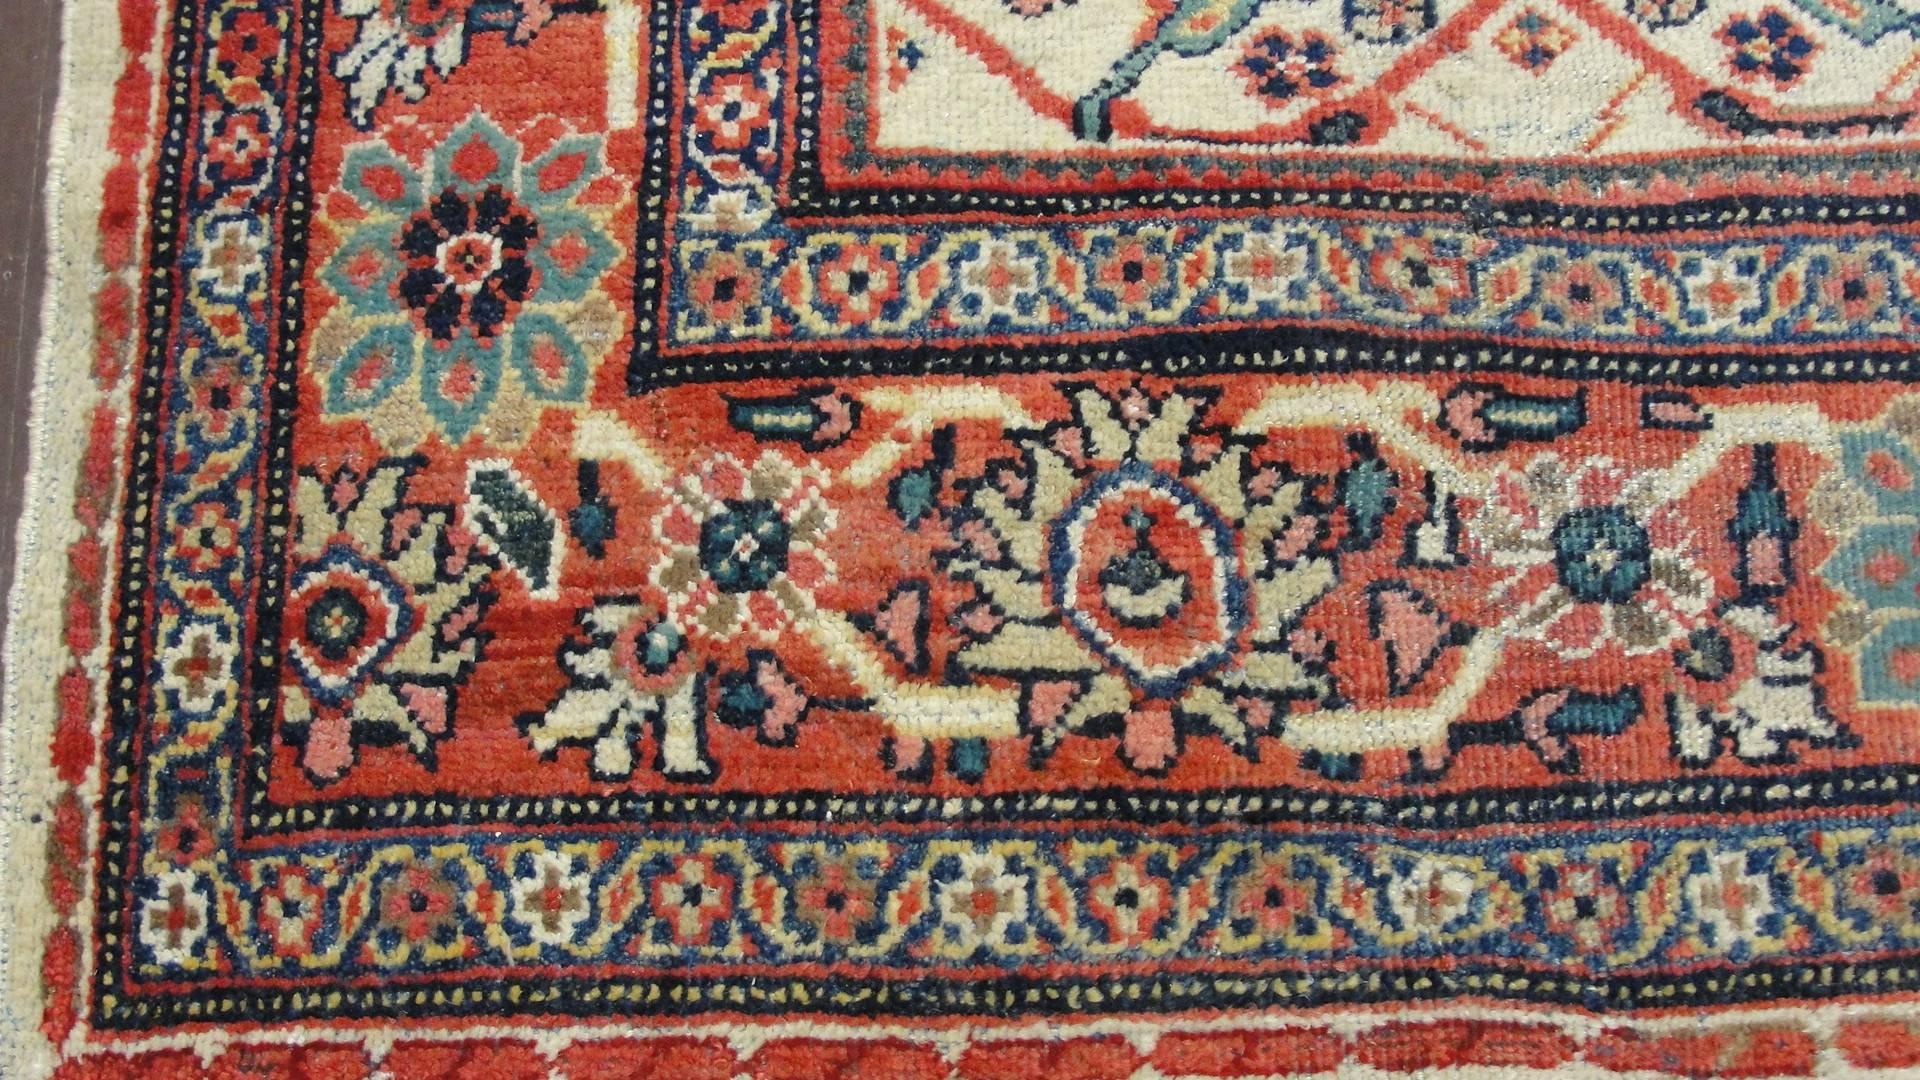  Antique Persian Sultanabad Carpet, 7' x 10' In Excellent Condition For Sale In Evanston, IL